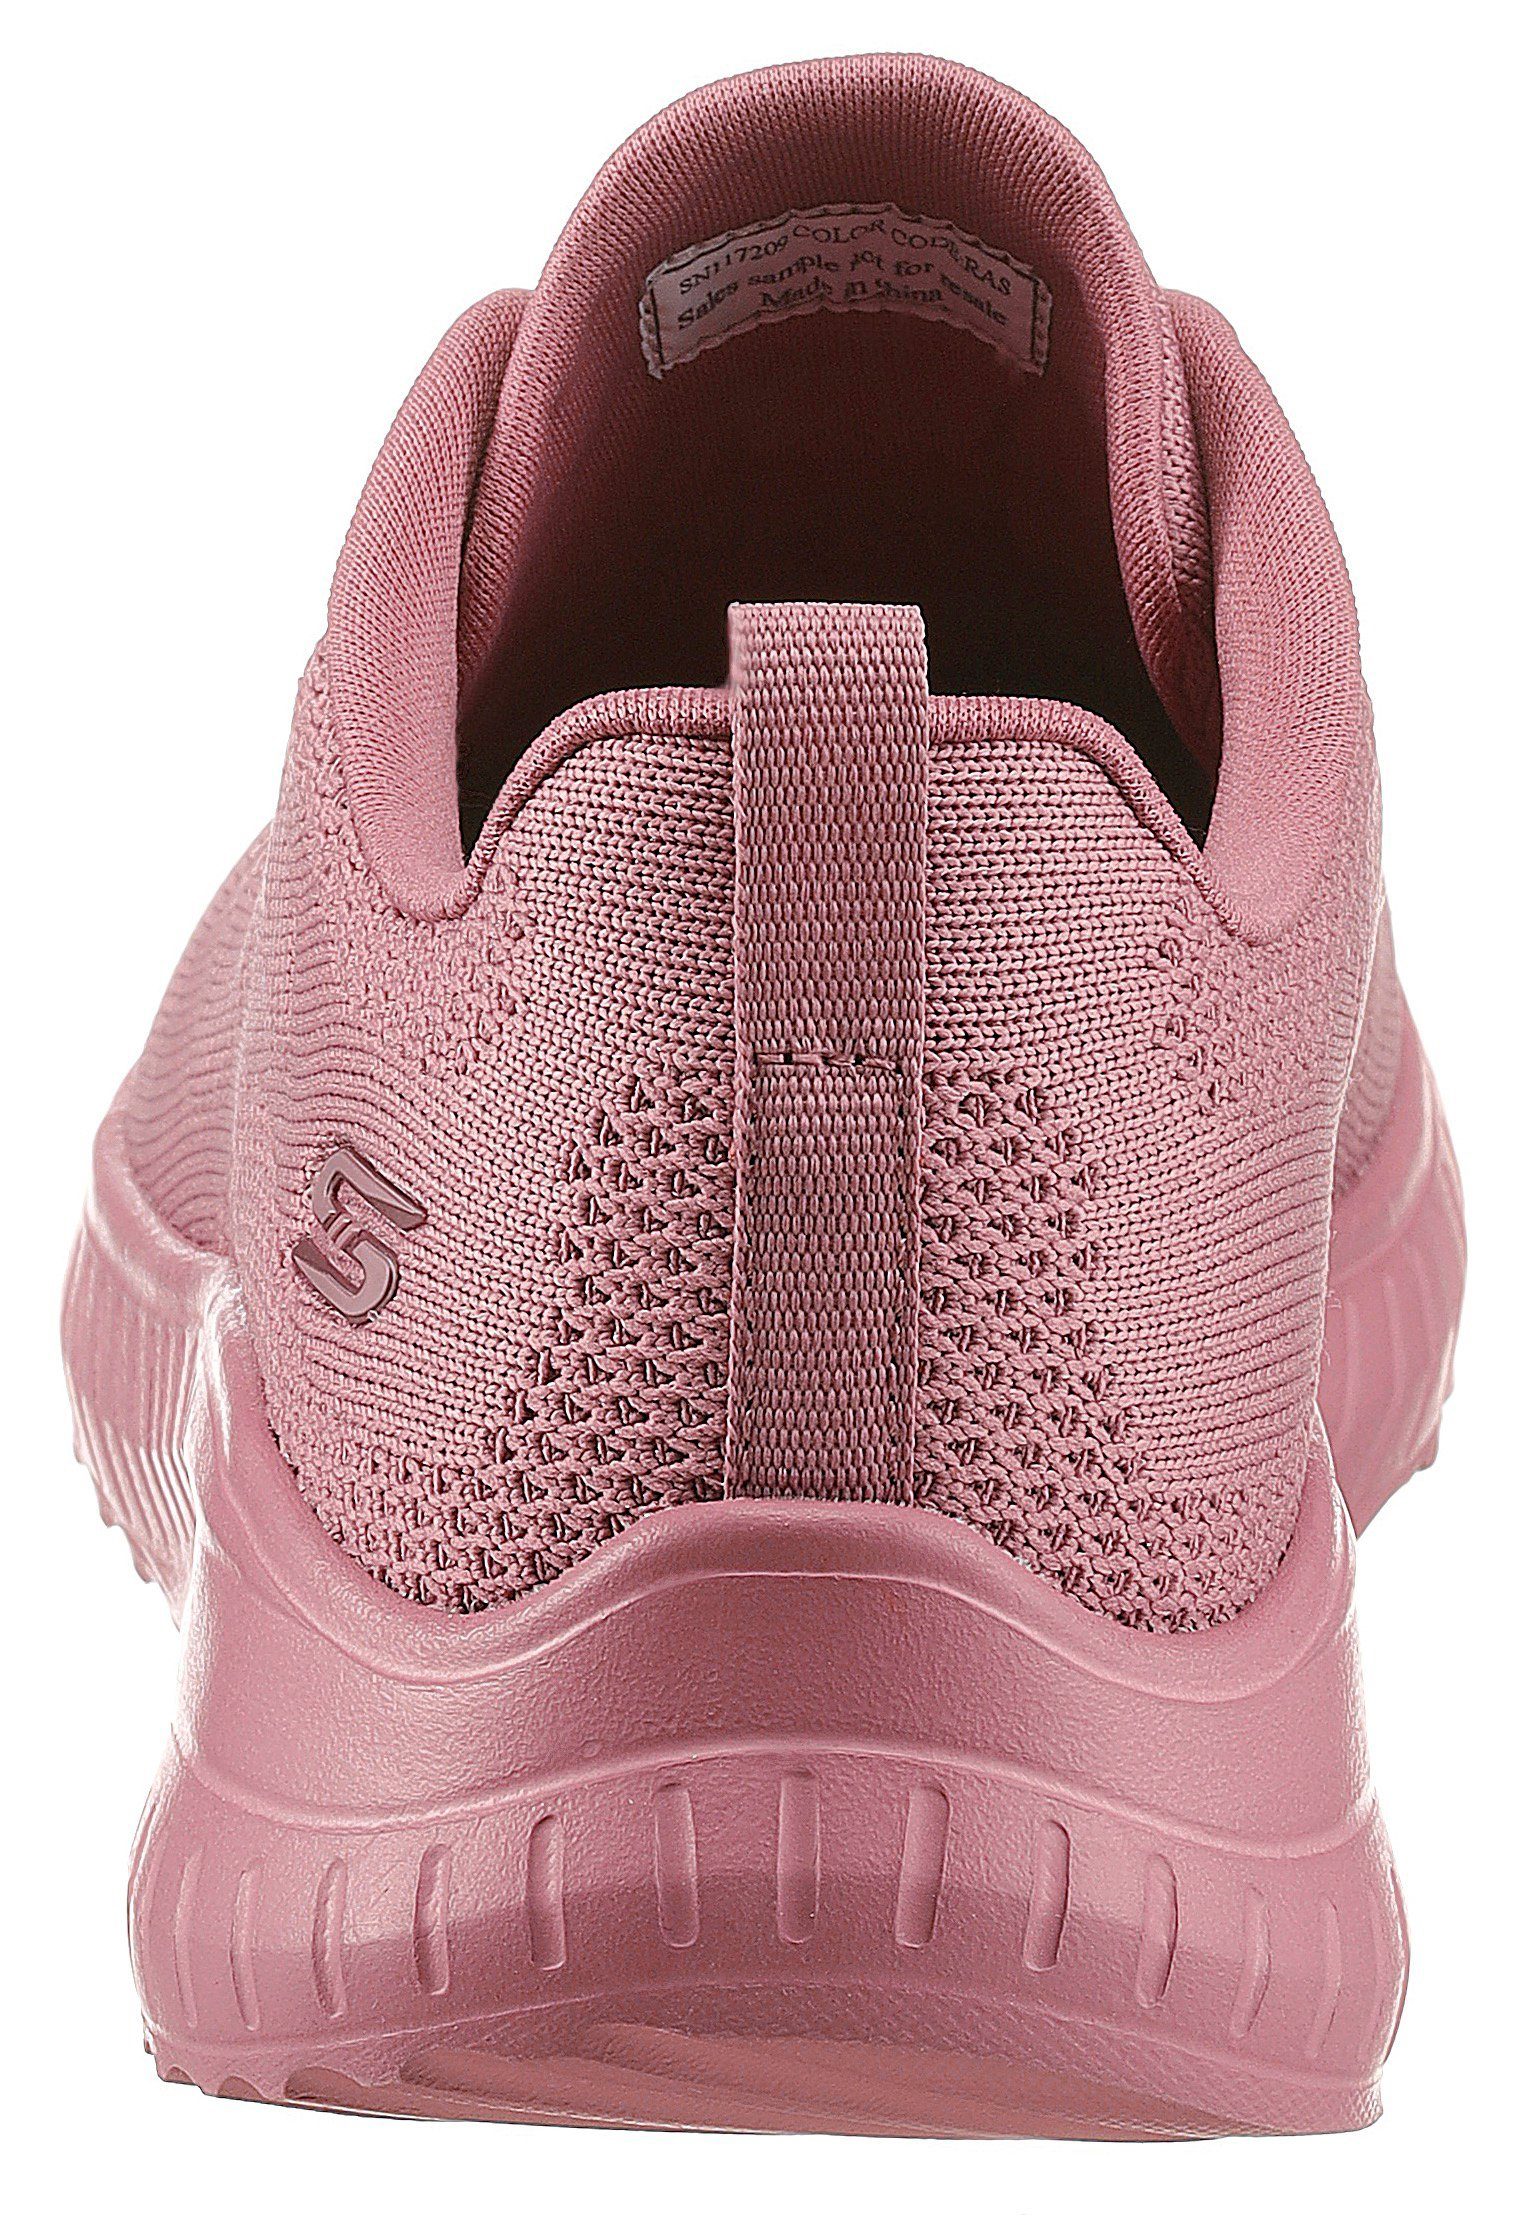 himbeere Skechers OFF Sneaker SQUAD Innensohle komfortabler mit BOBS CHAOS FACE